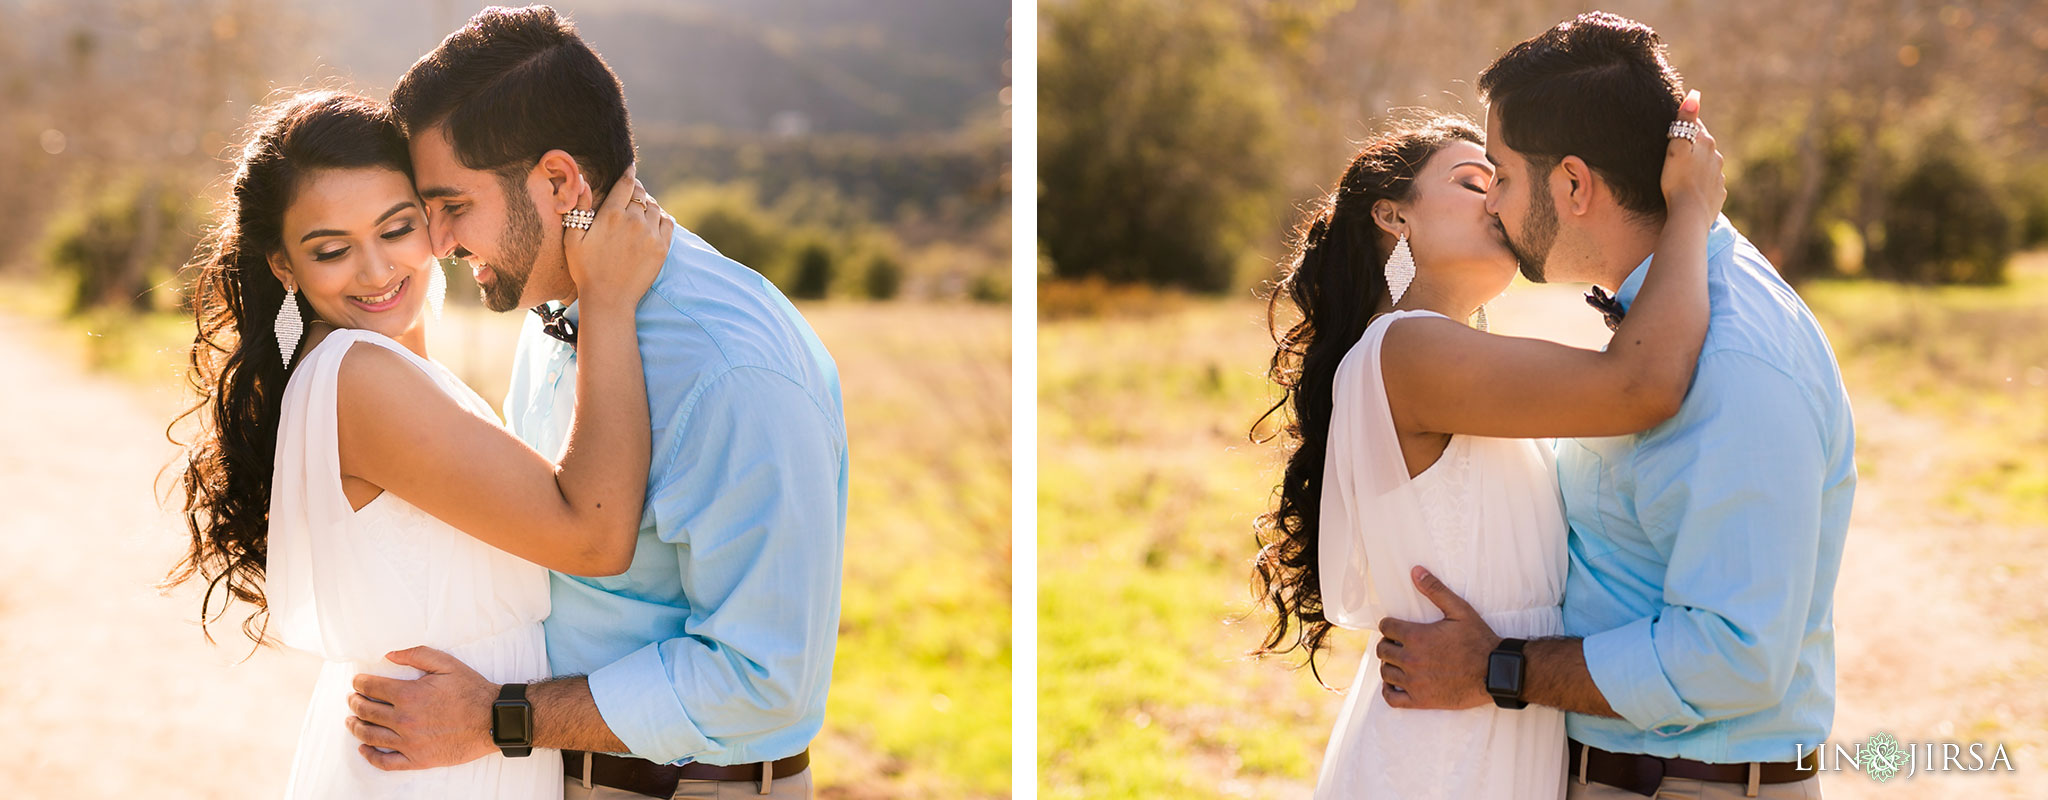 02 james dilley preserve orange county engagement photography